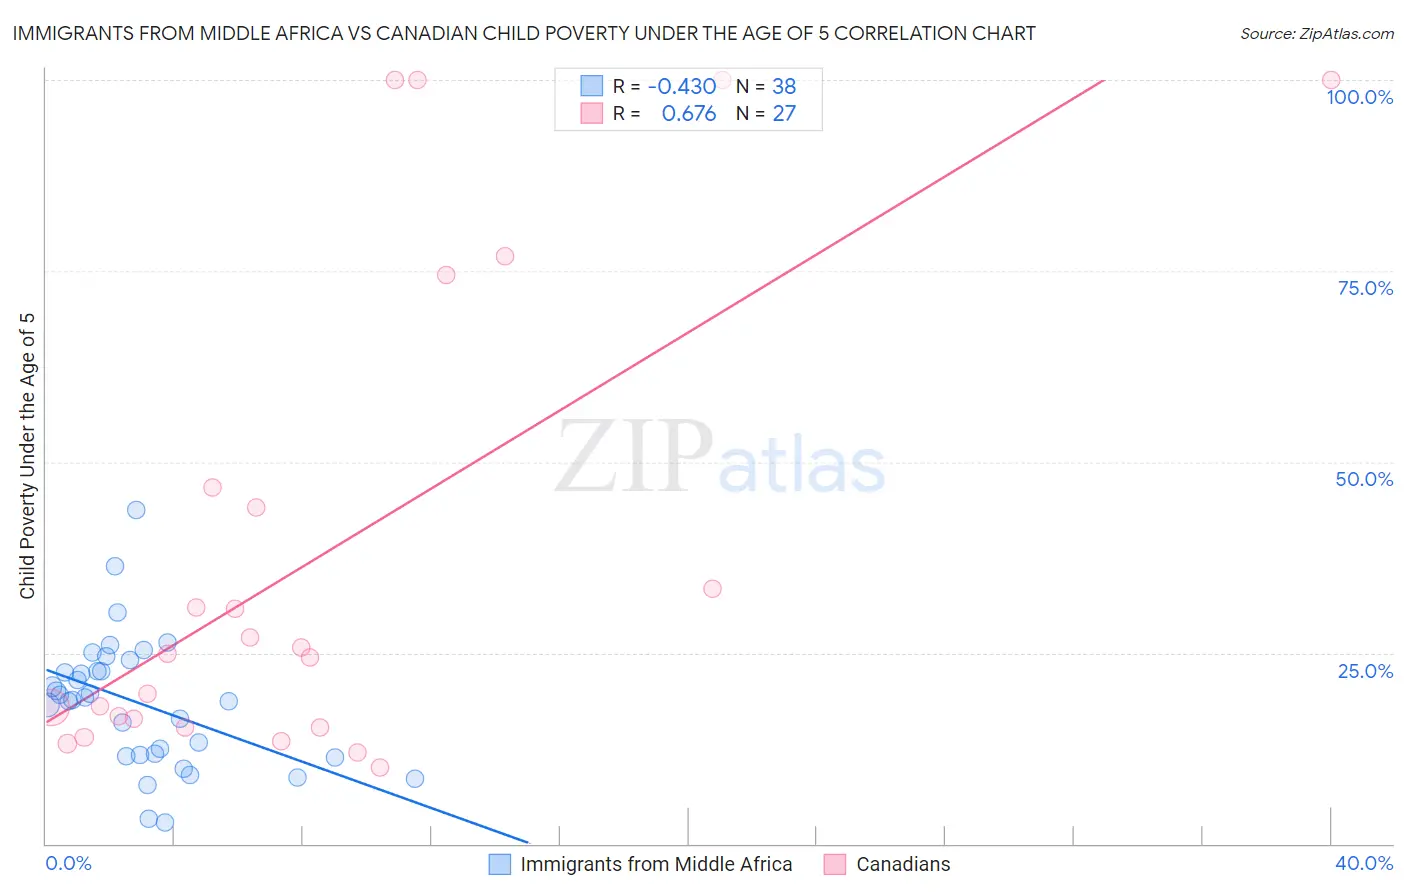 Immigrants from Middle Africa vs Canadian Child Poverty Under the Age of 5